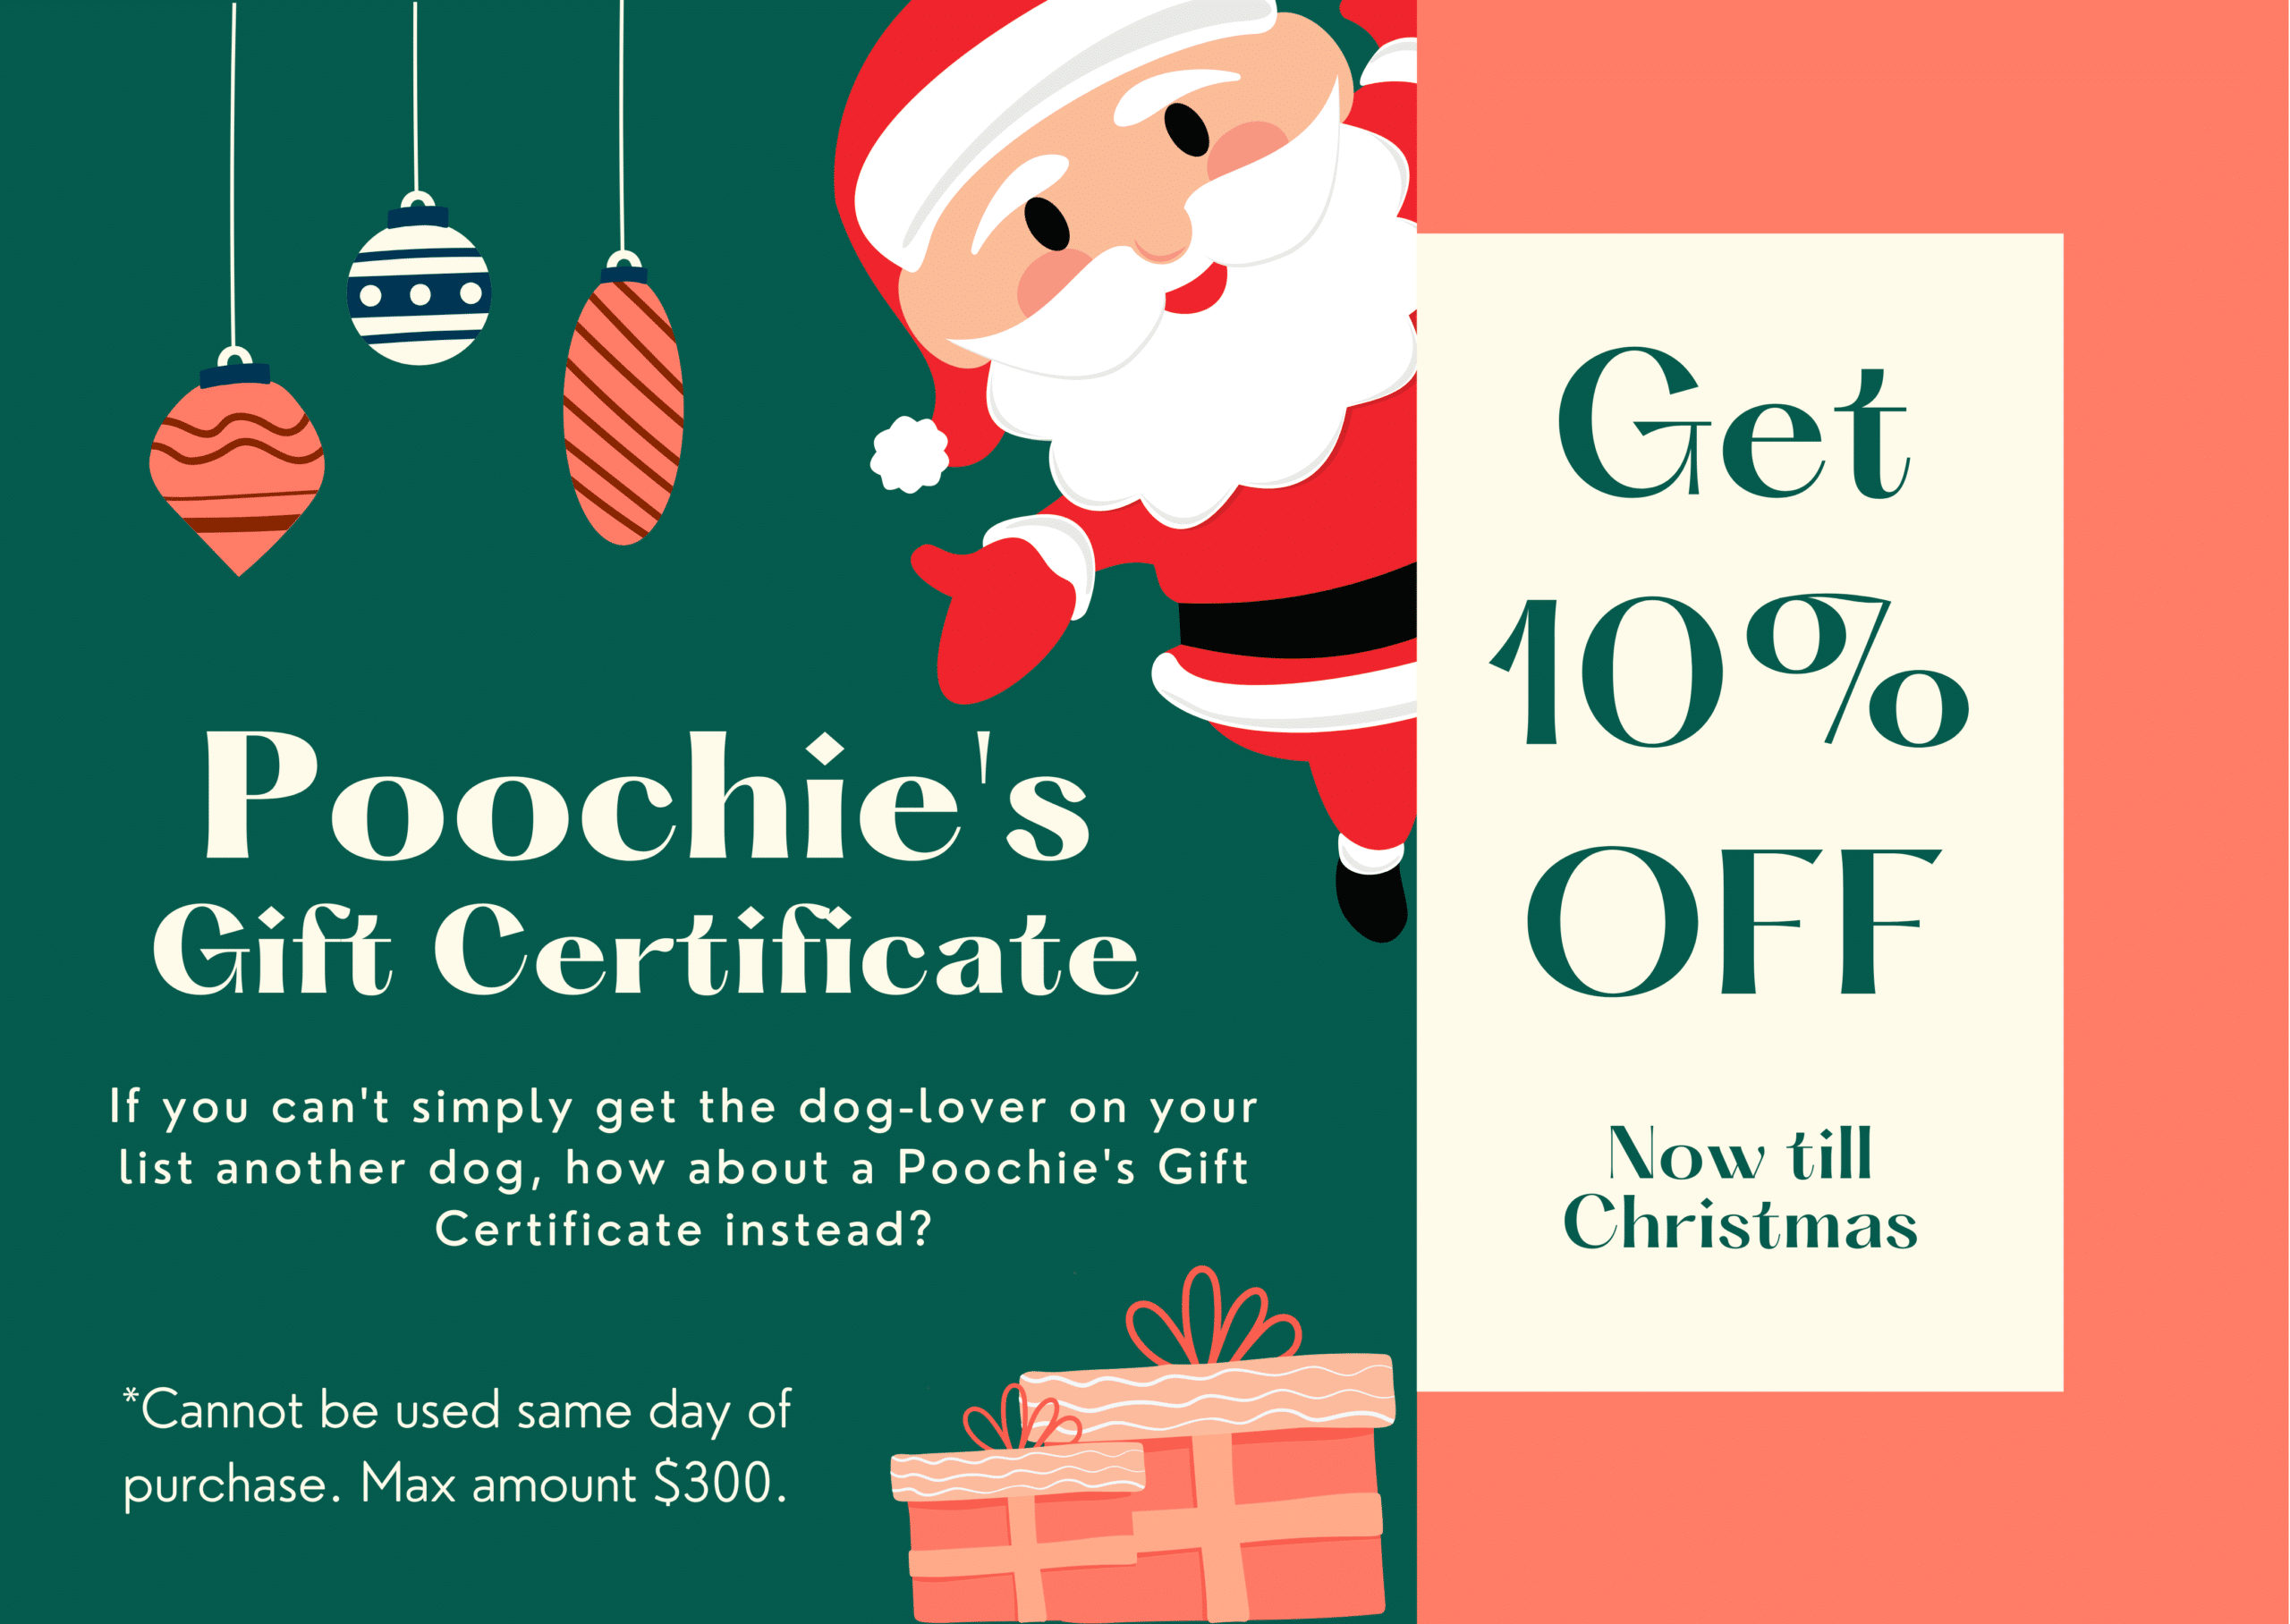 Poochie's Park Gift Certificate SALE